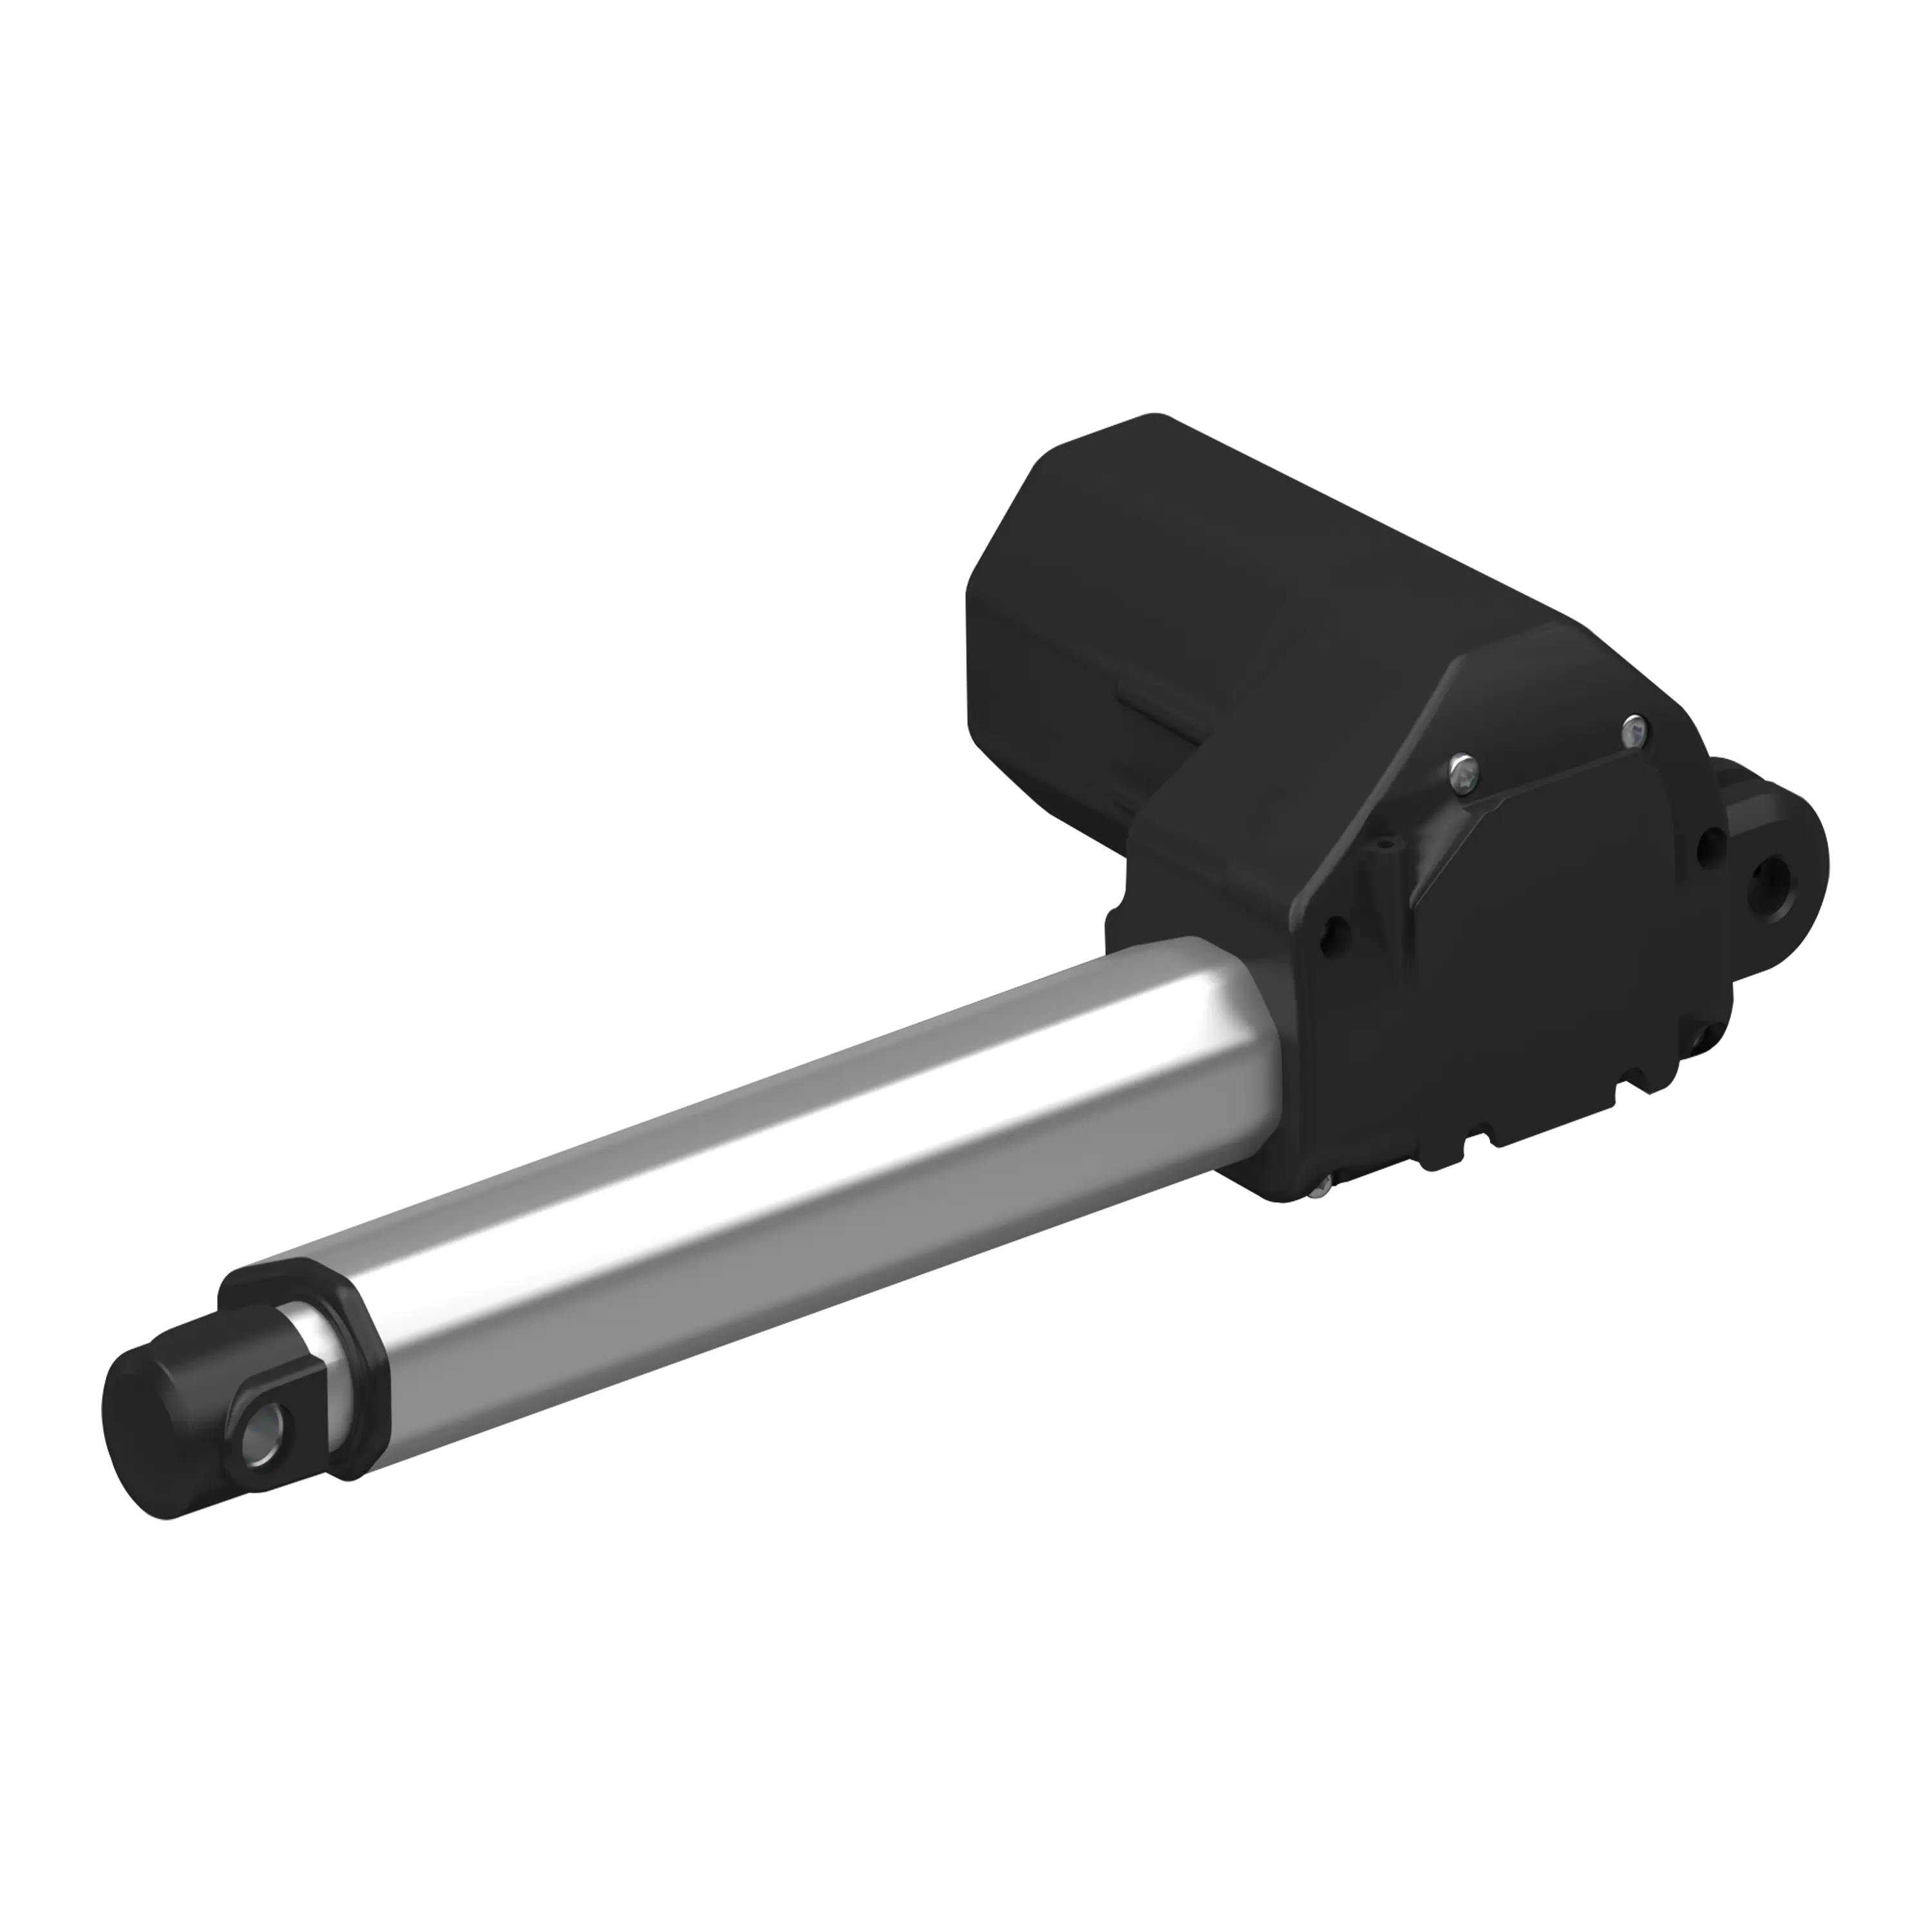 U1 Linear Actuator For Lift Chair